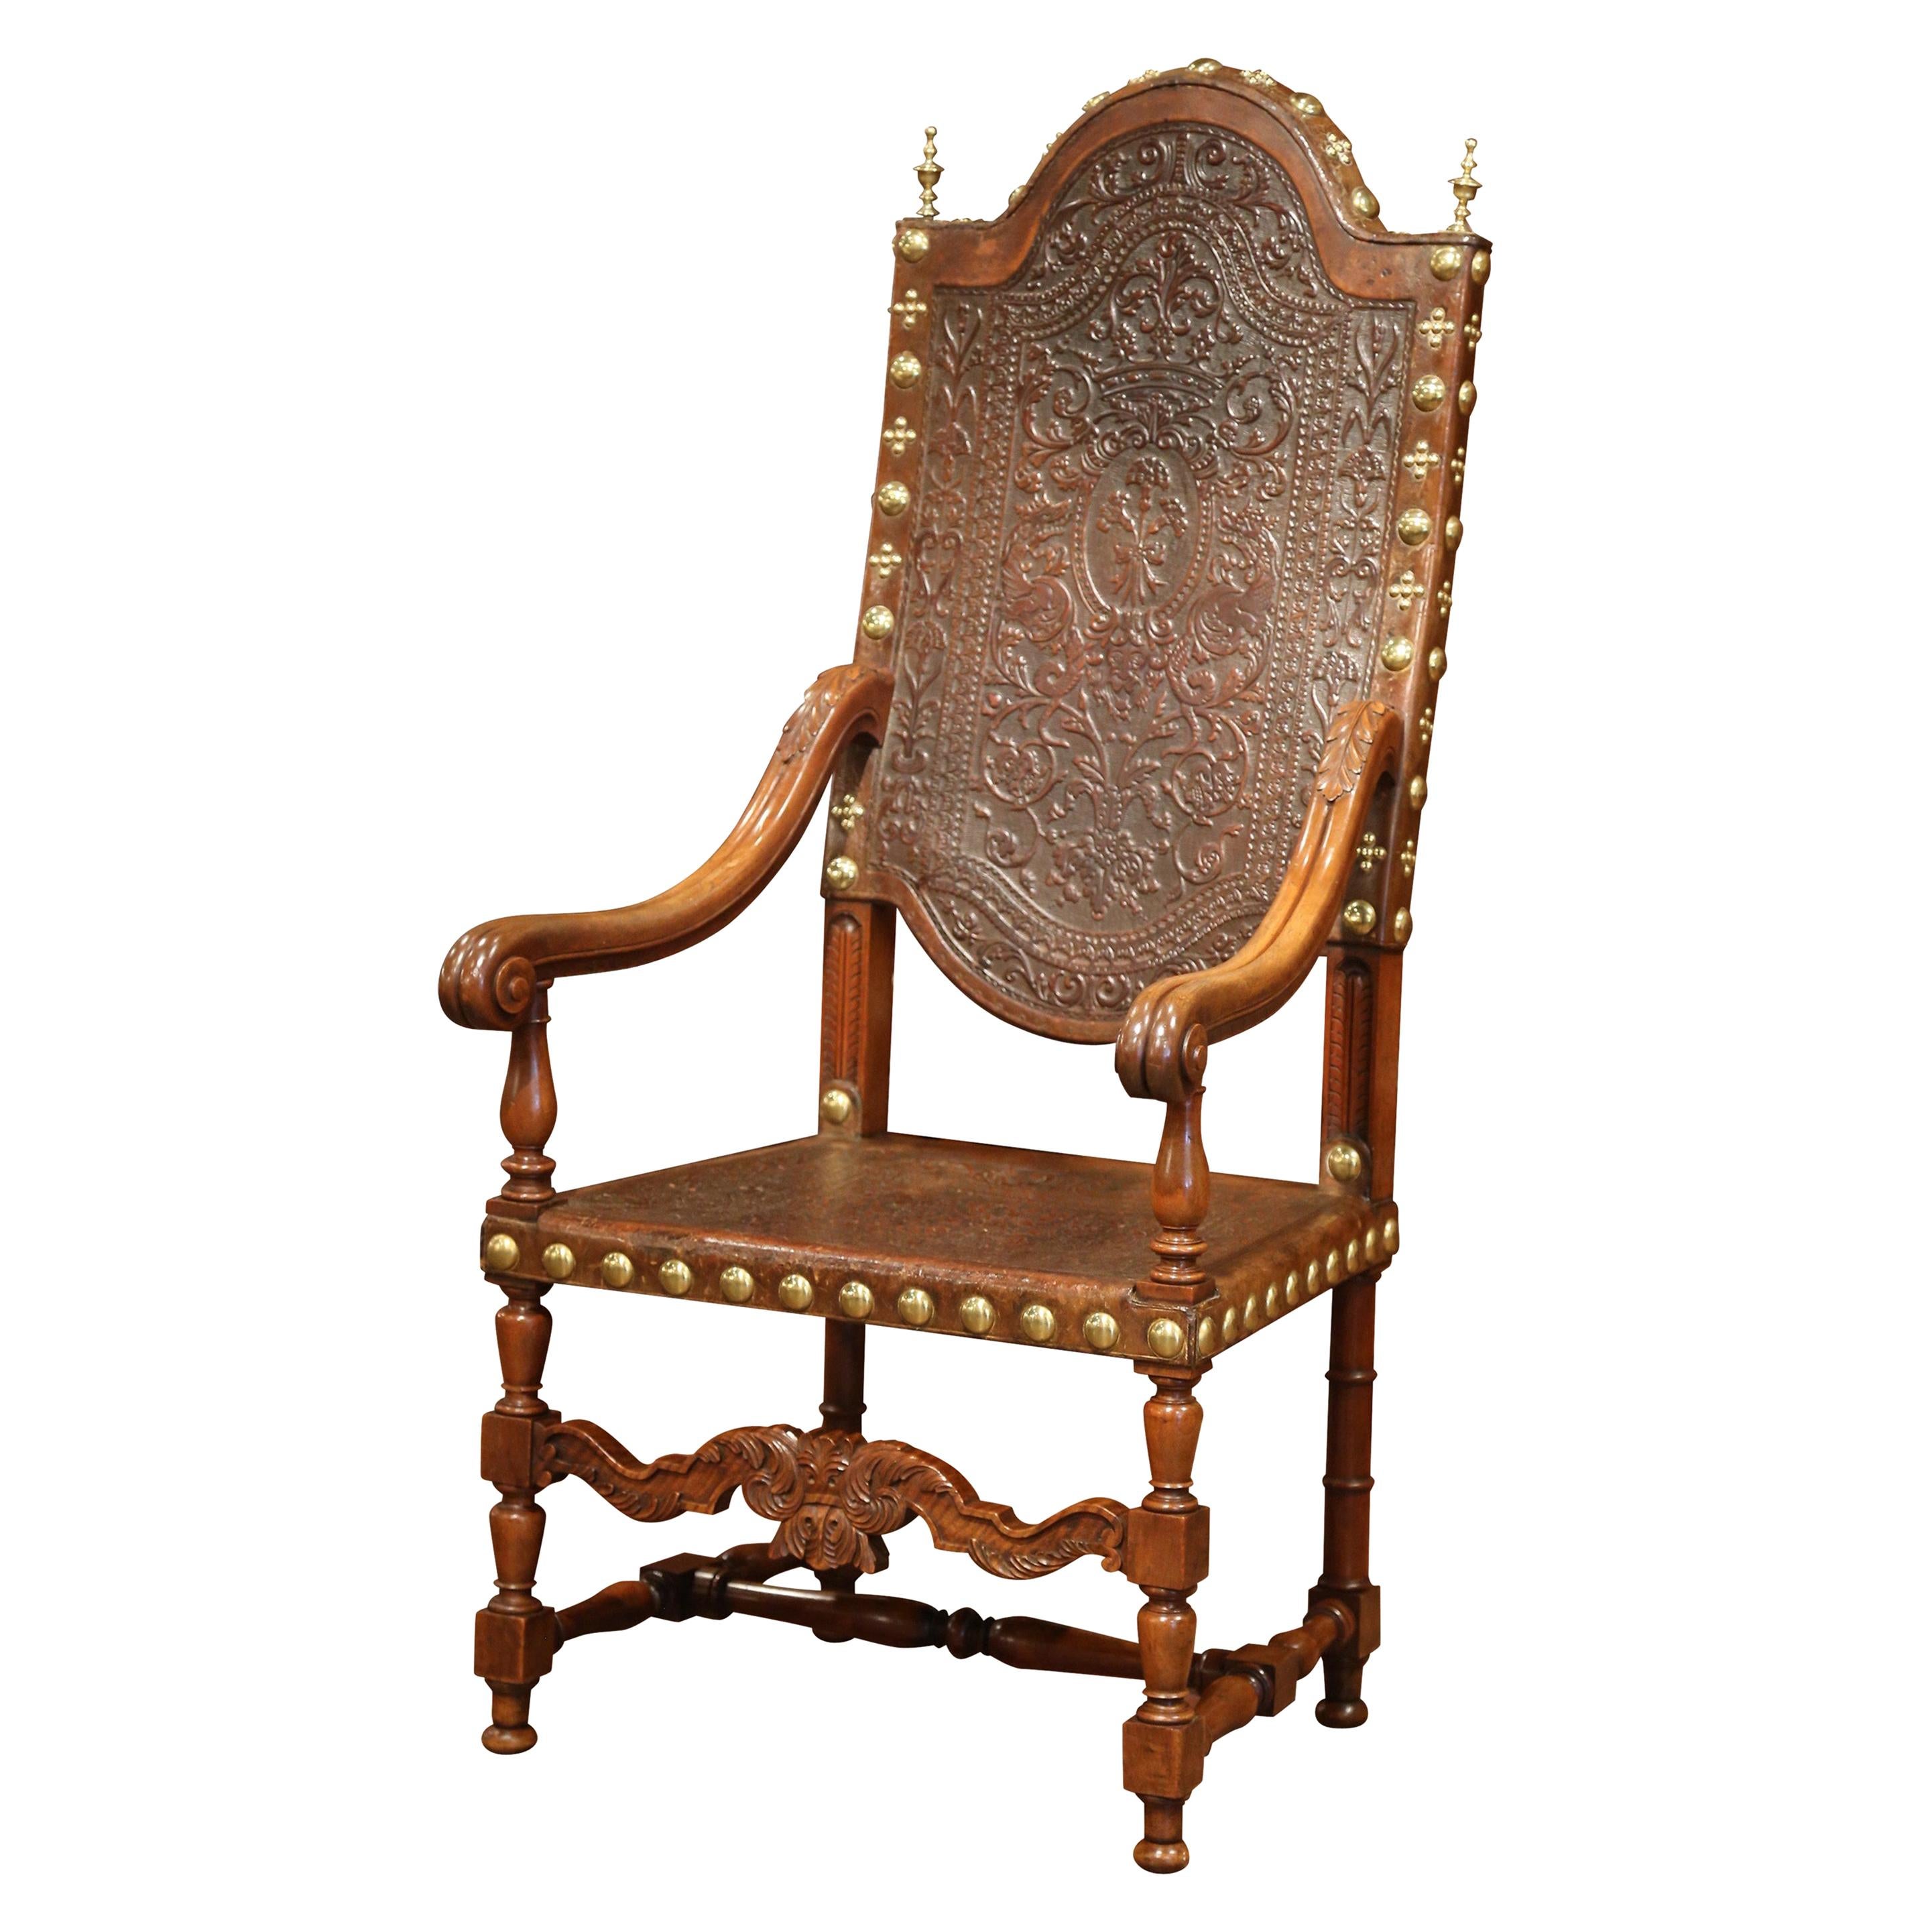 18th Century Spanish Carved Walnut Armchair with Embossed Leather and Finials